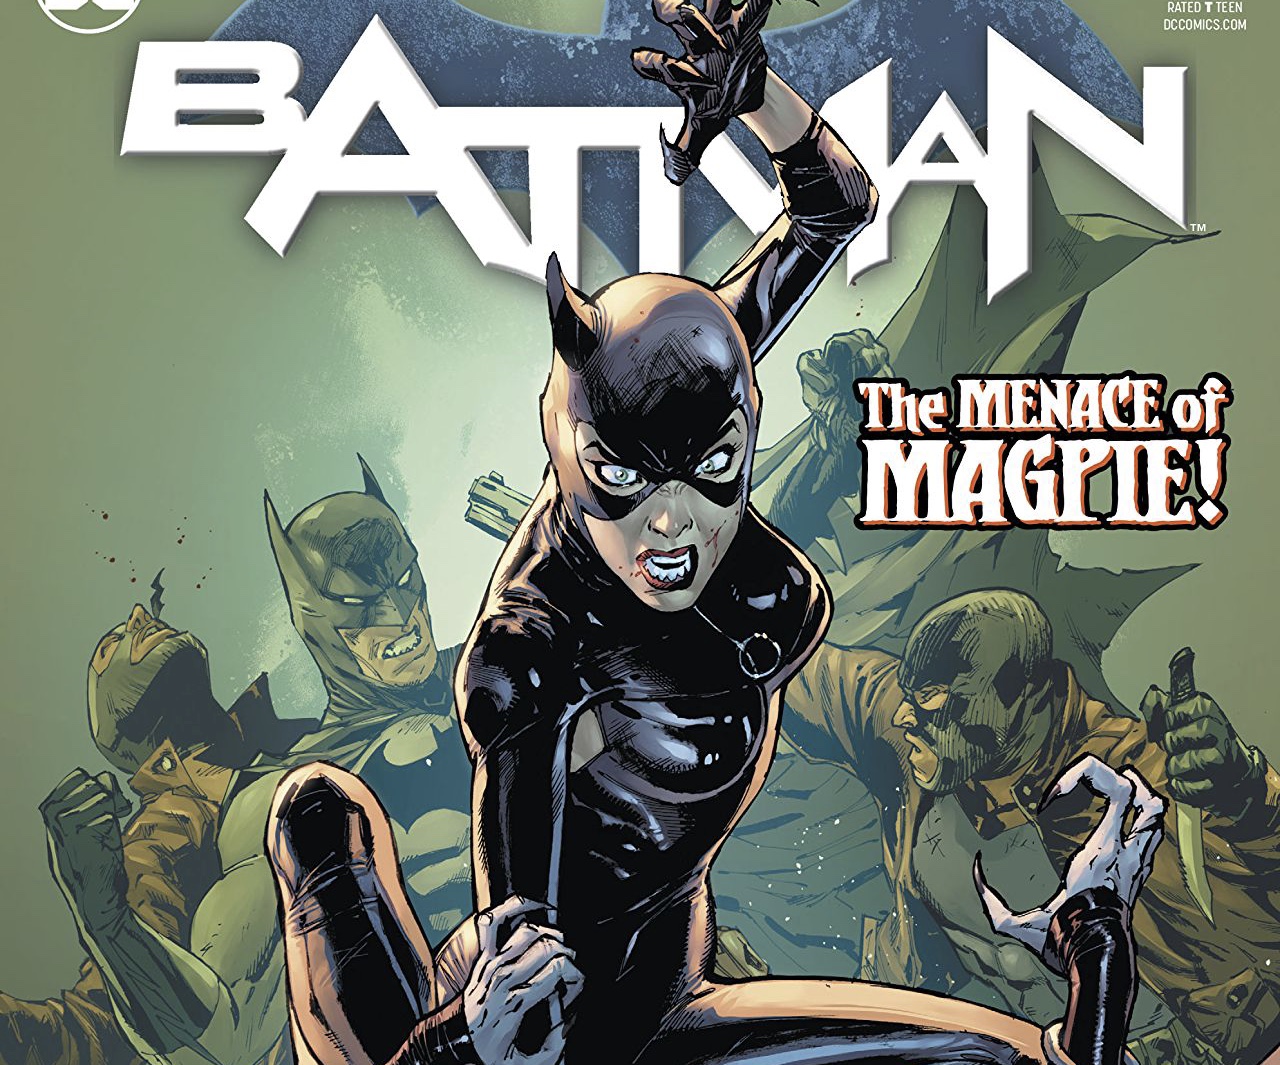 Batman #79 review: the boat or the street?